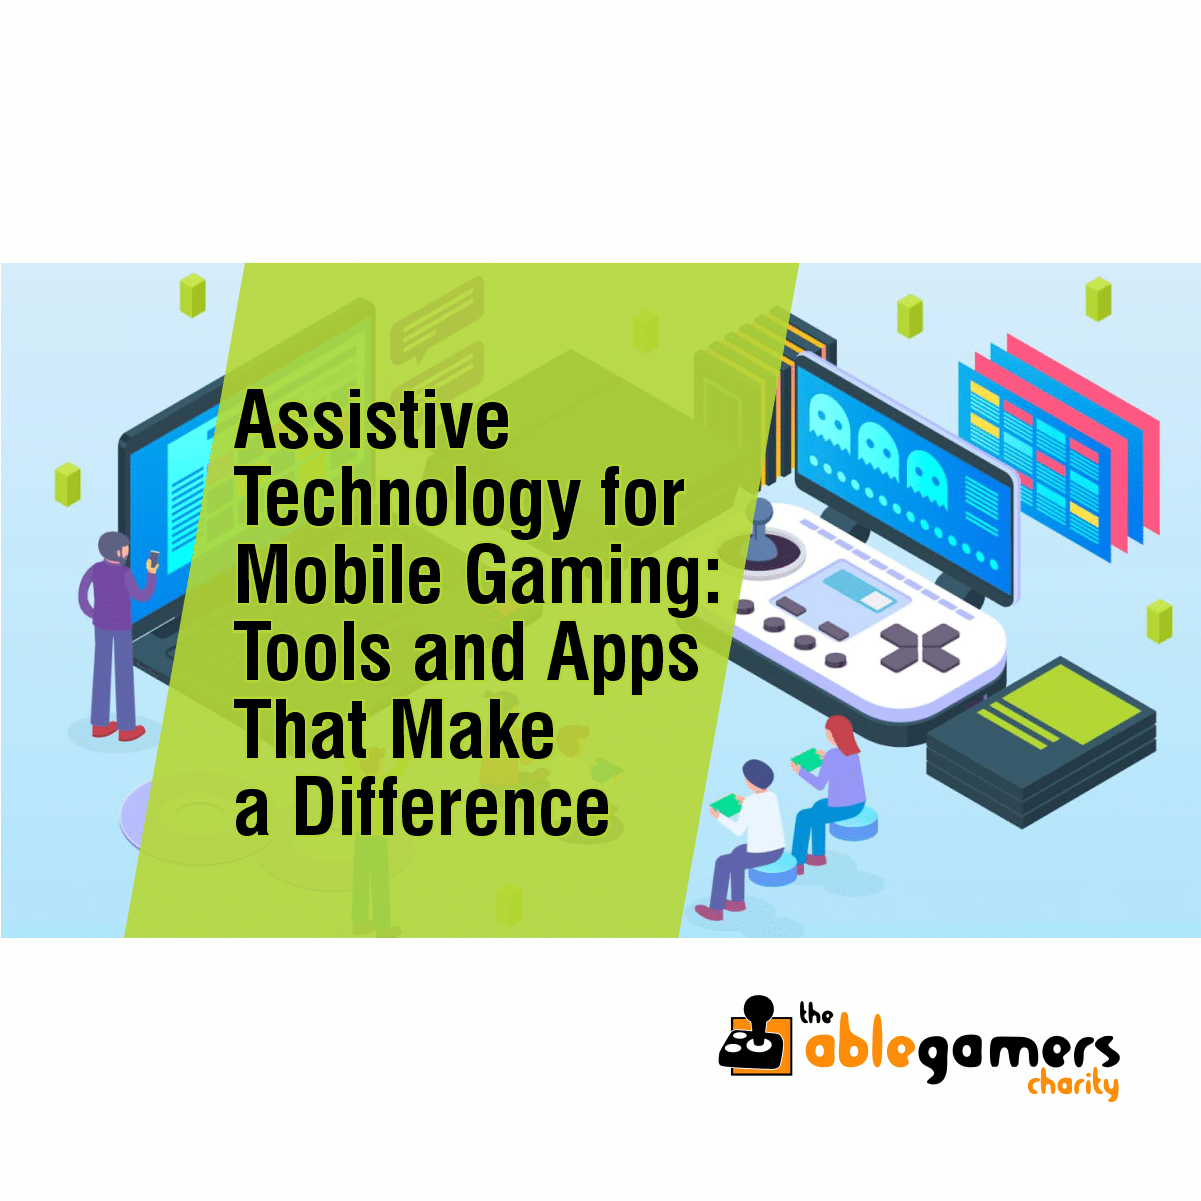 A cartoon style graphic people using hand held devices and a laptop and text that says 'Assistive Technology for Mobile Gaming: Tools and Apps That Make a Difference'